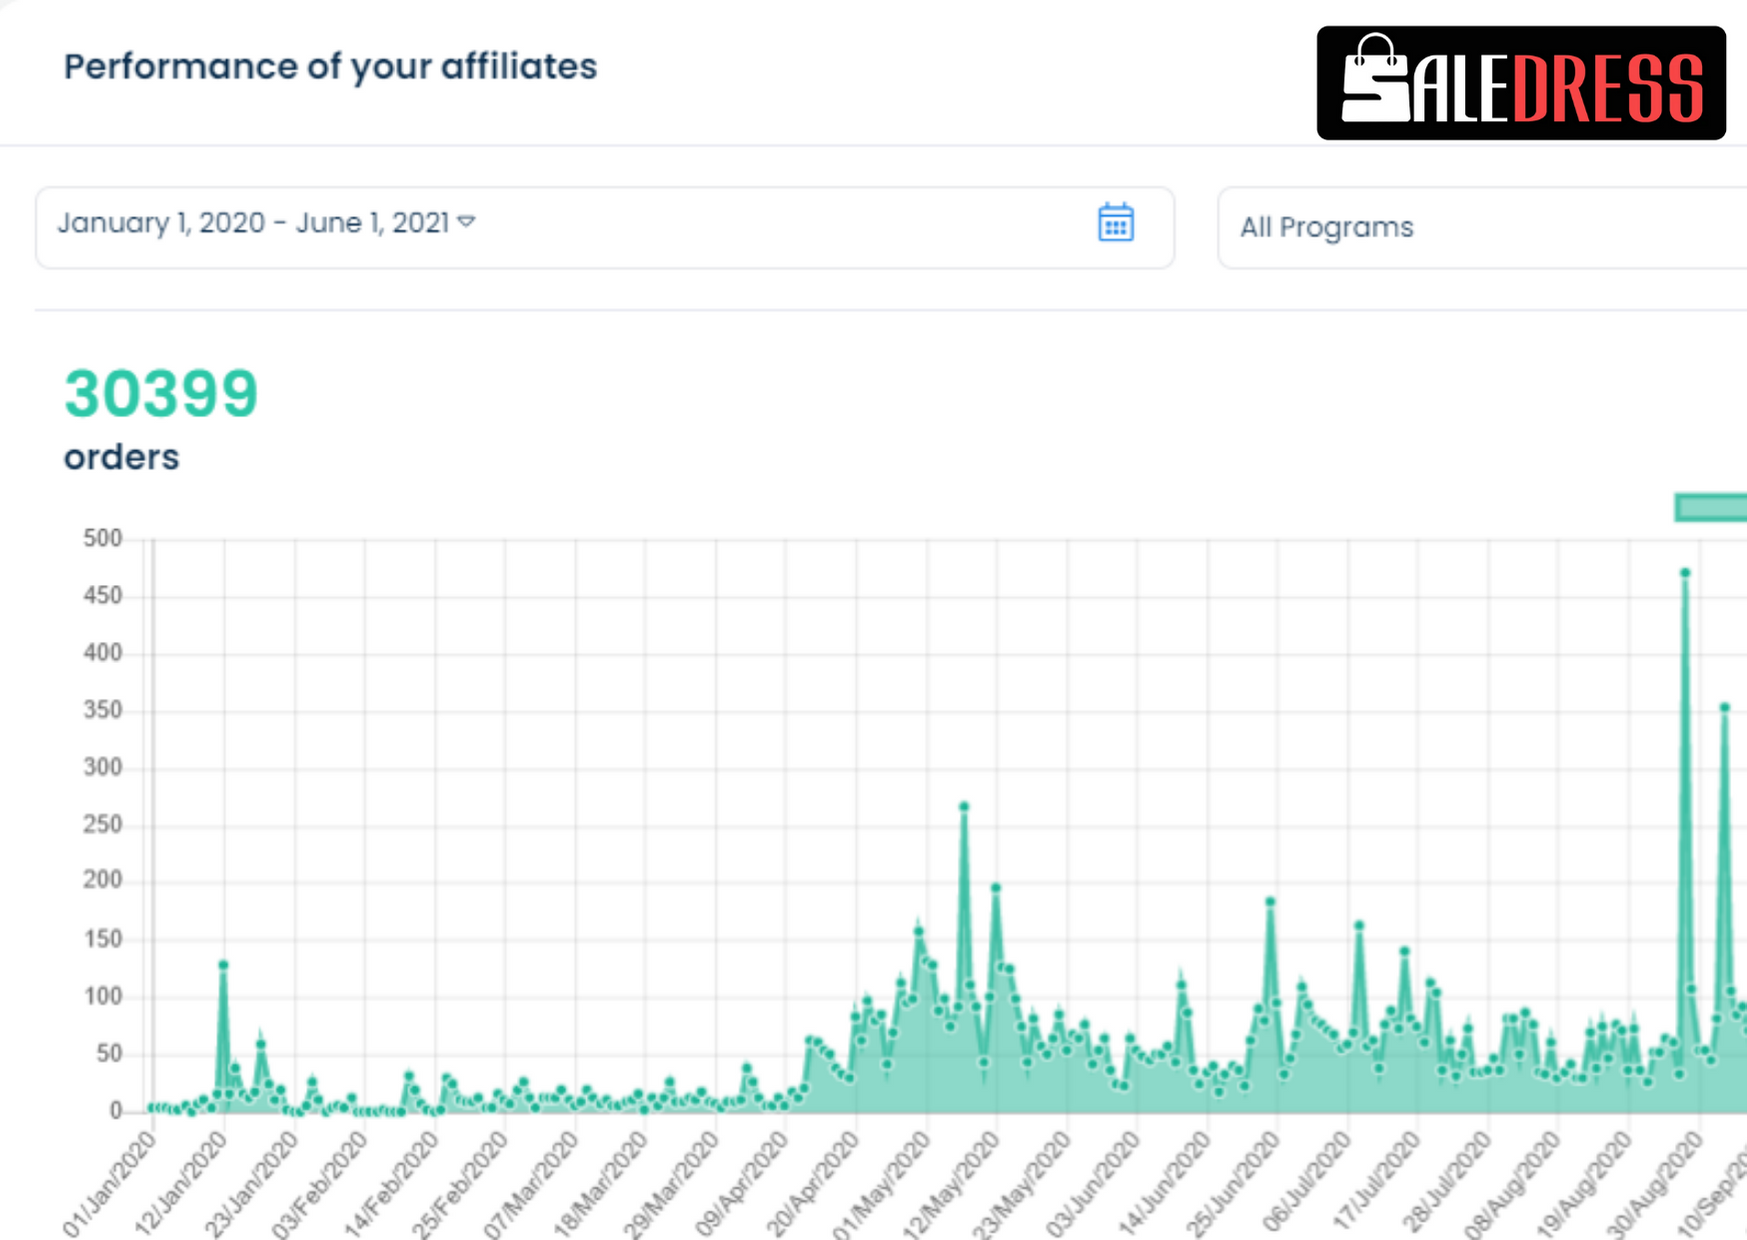 After more than 1 year, we got > 30k orders from affiliates